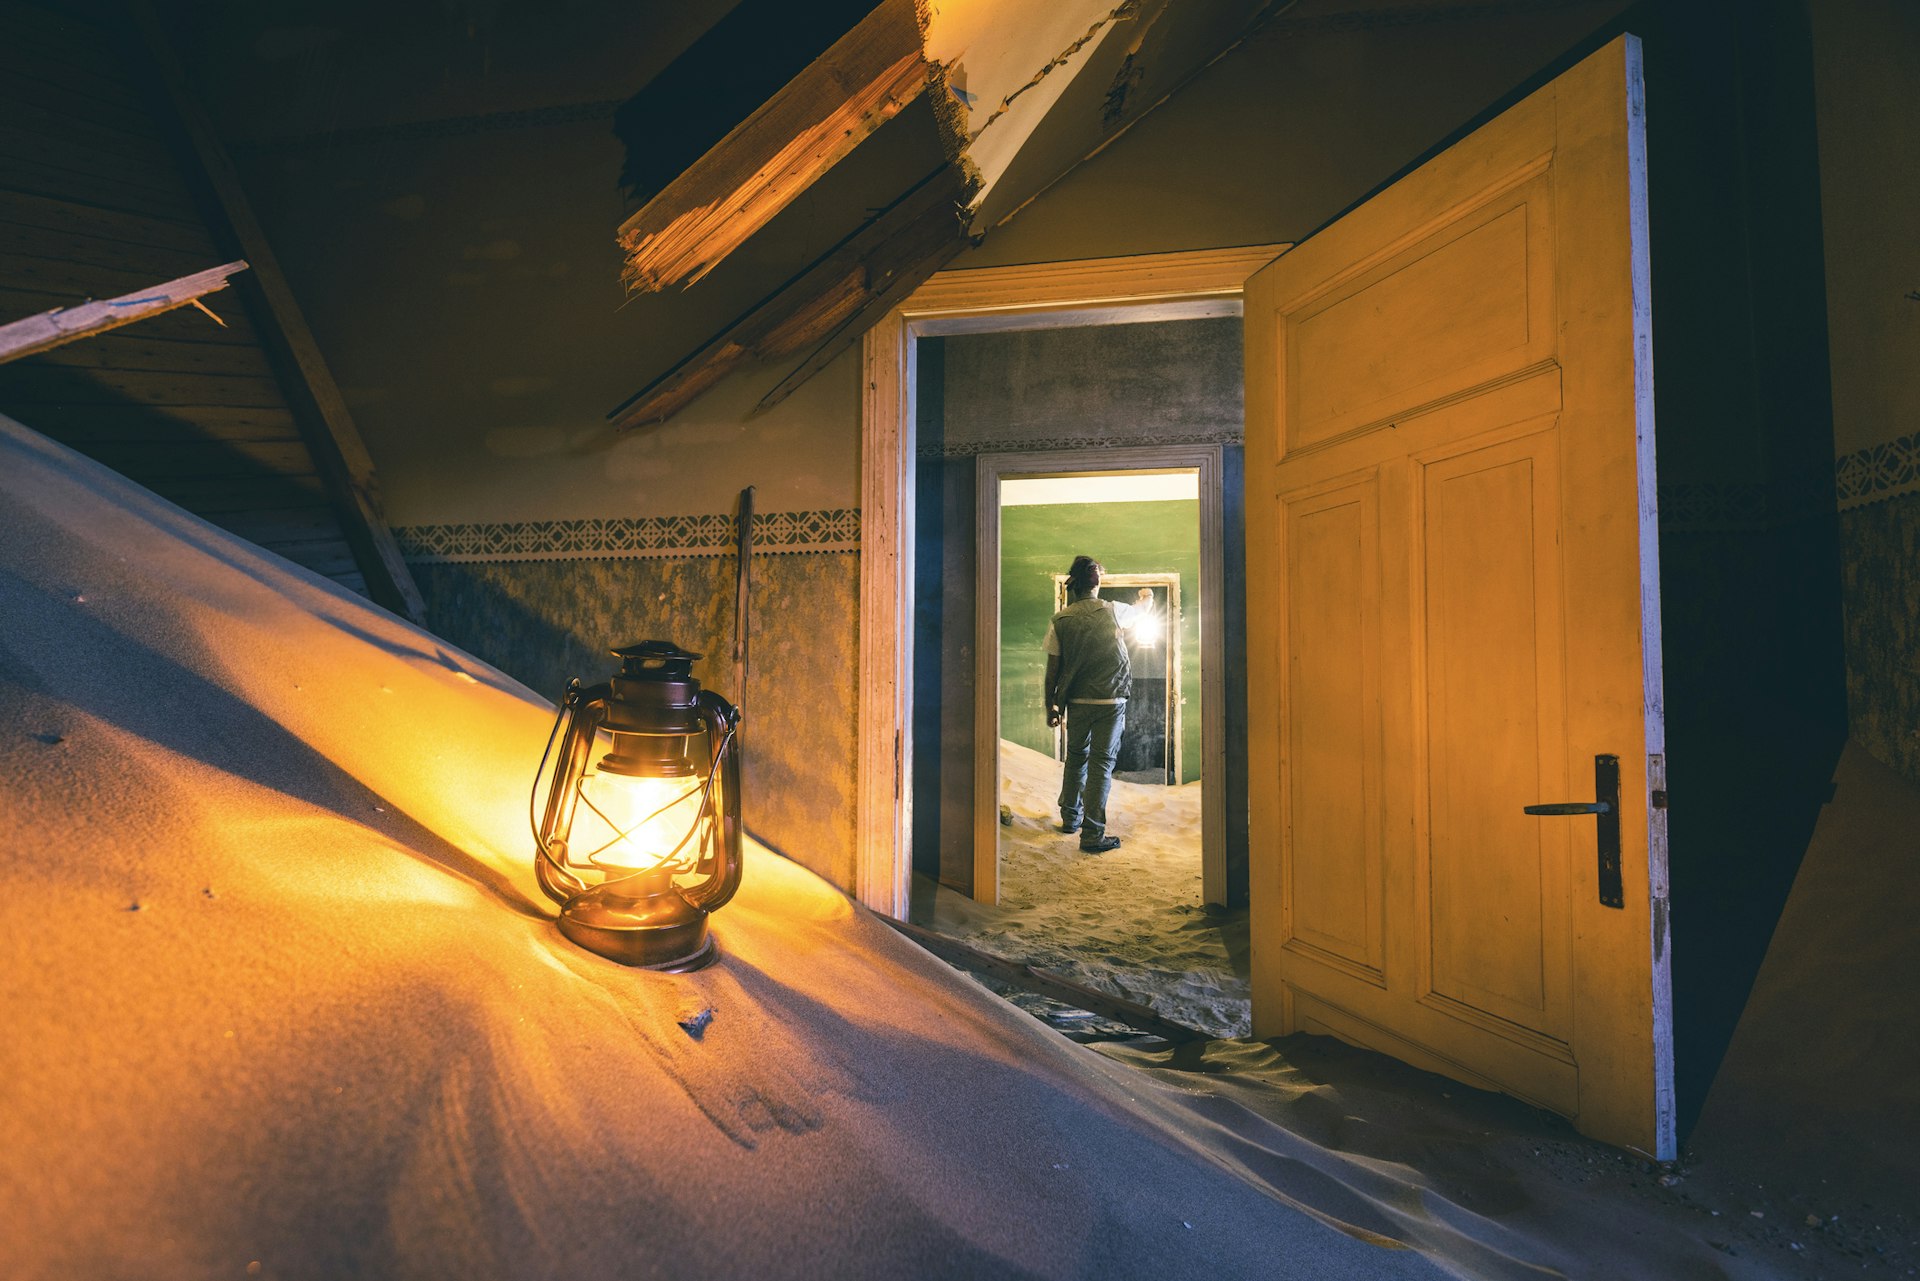 One man with a lantern exploring an abandoned building filled with sand